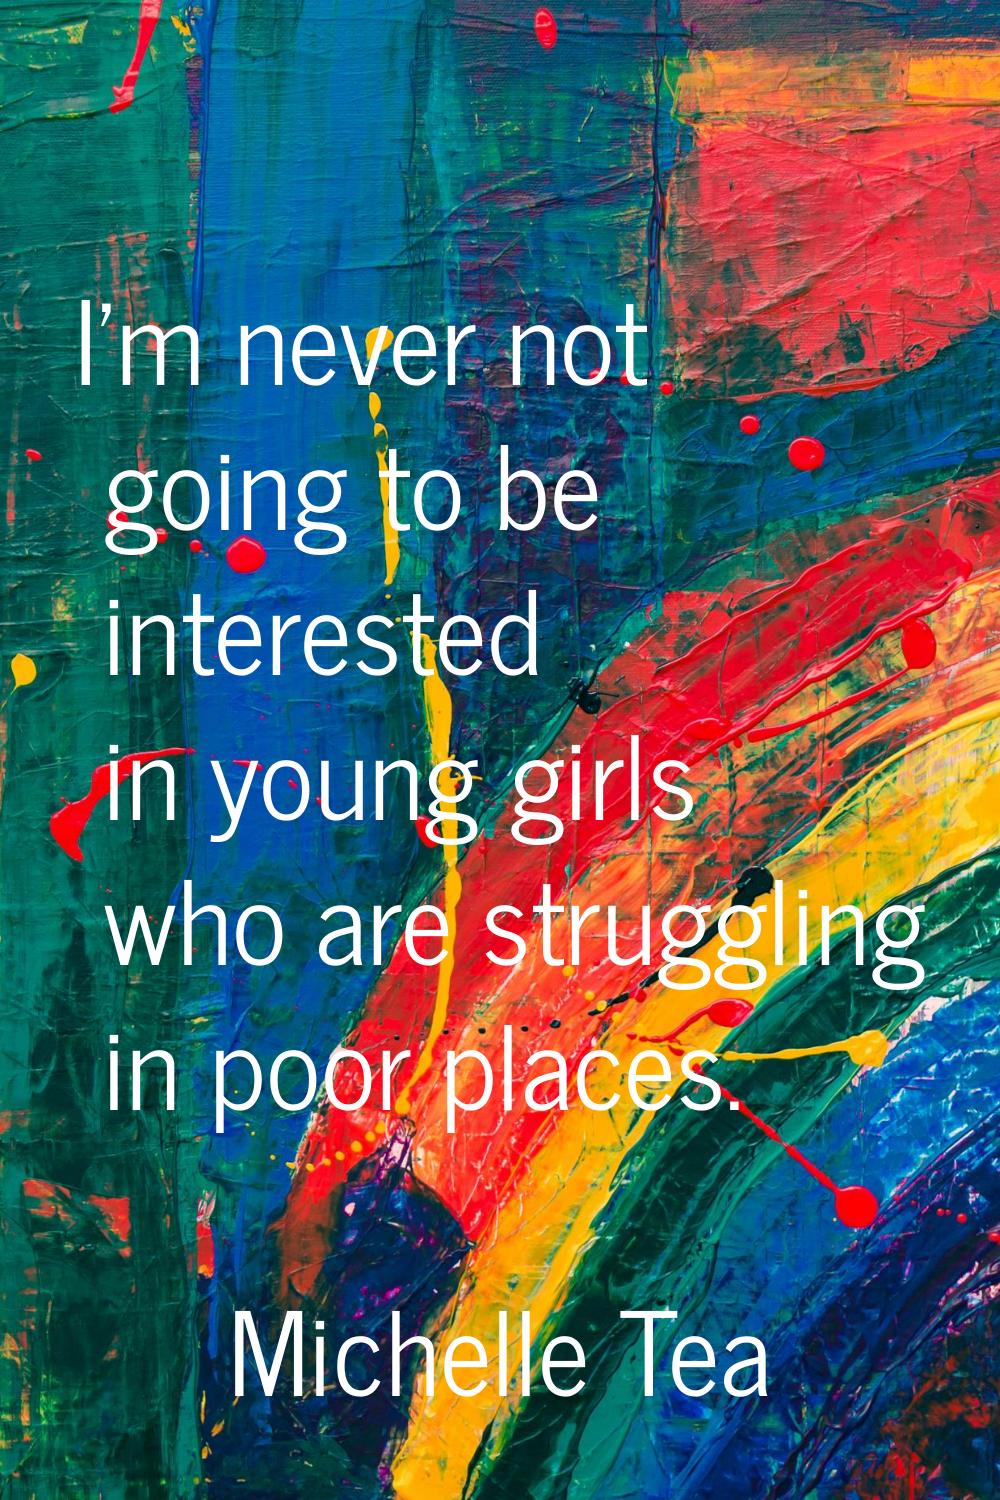 I'm never not going to be interested in young girls who are struggling in poor places.